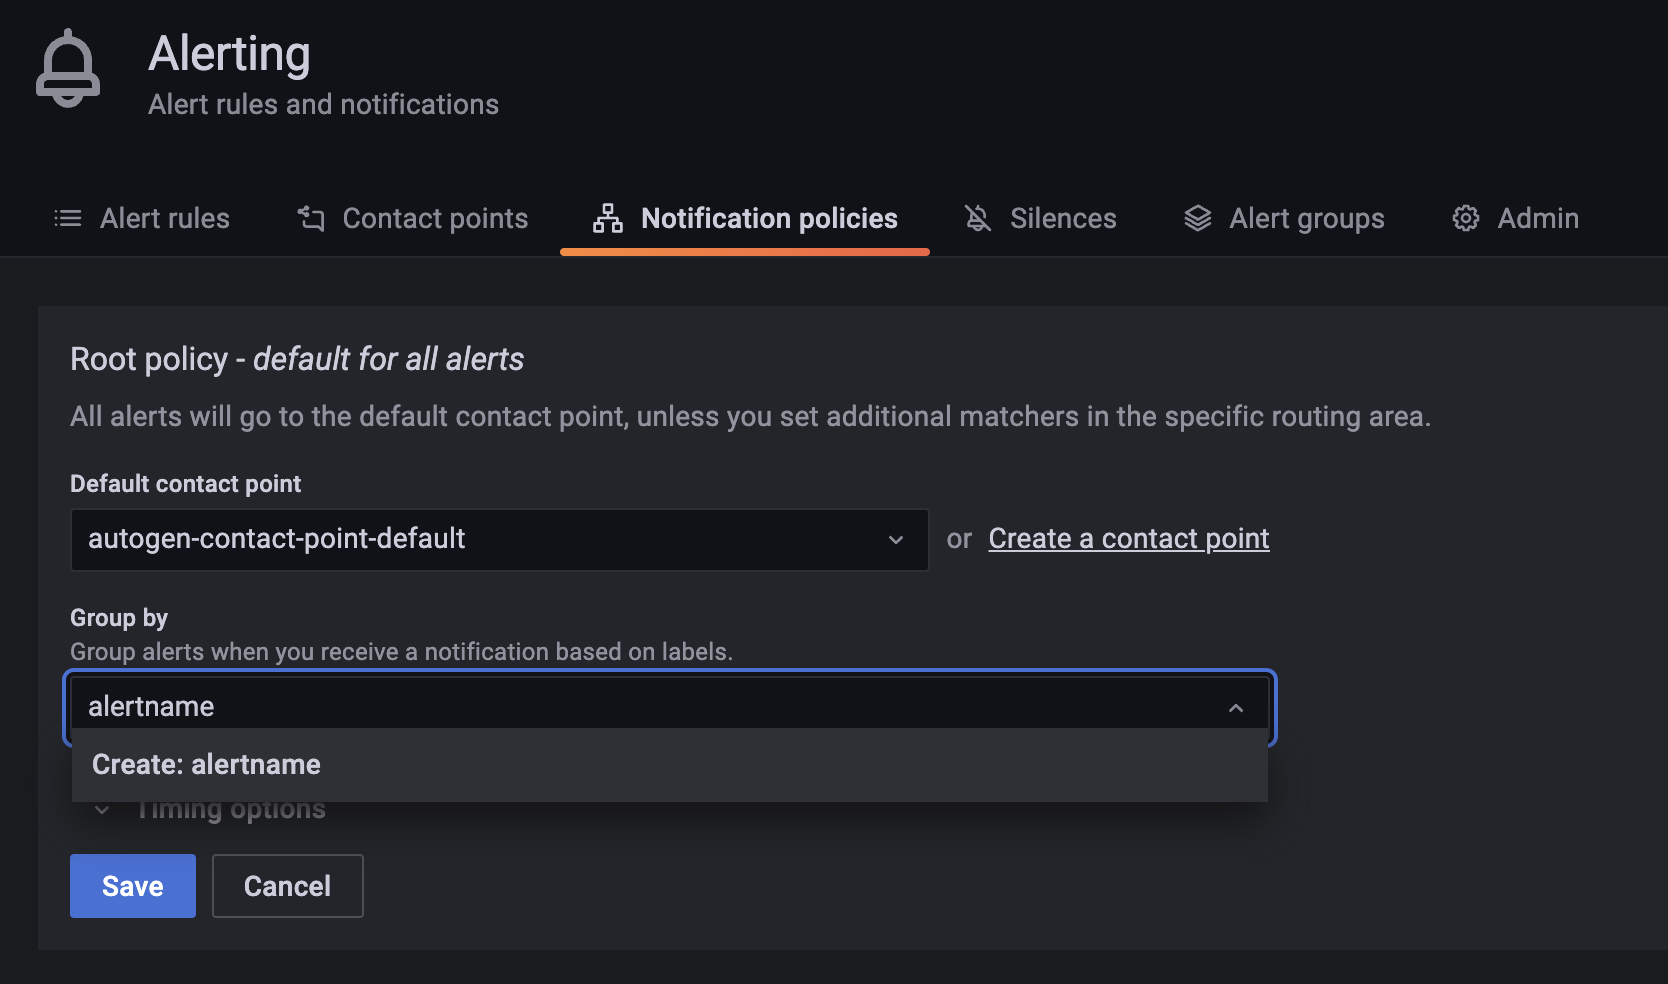 Notification policies grouping